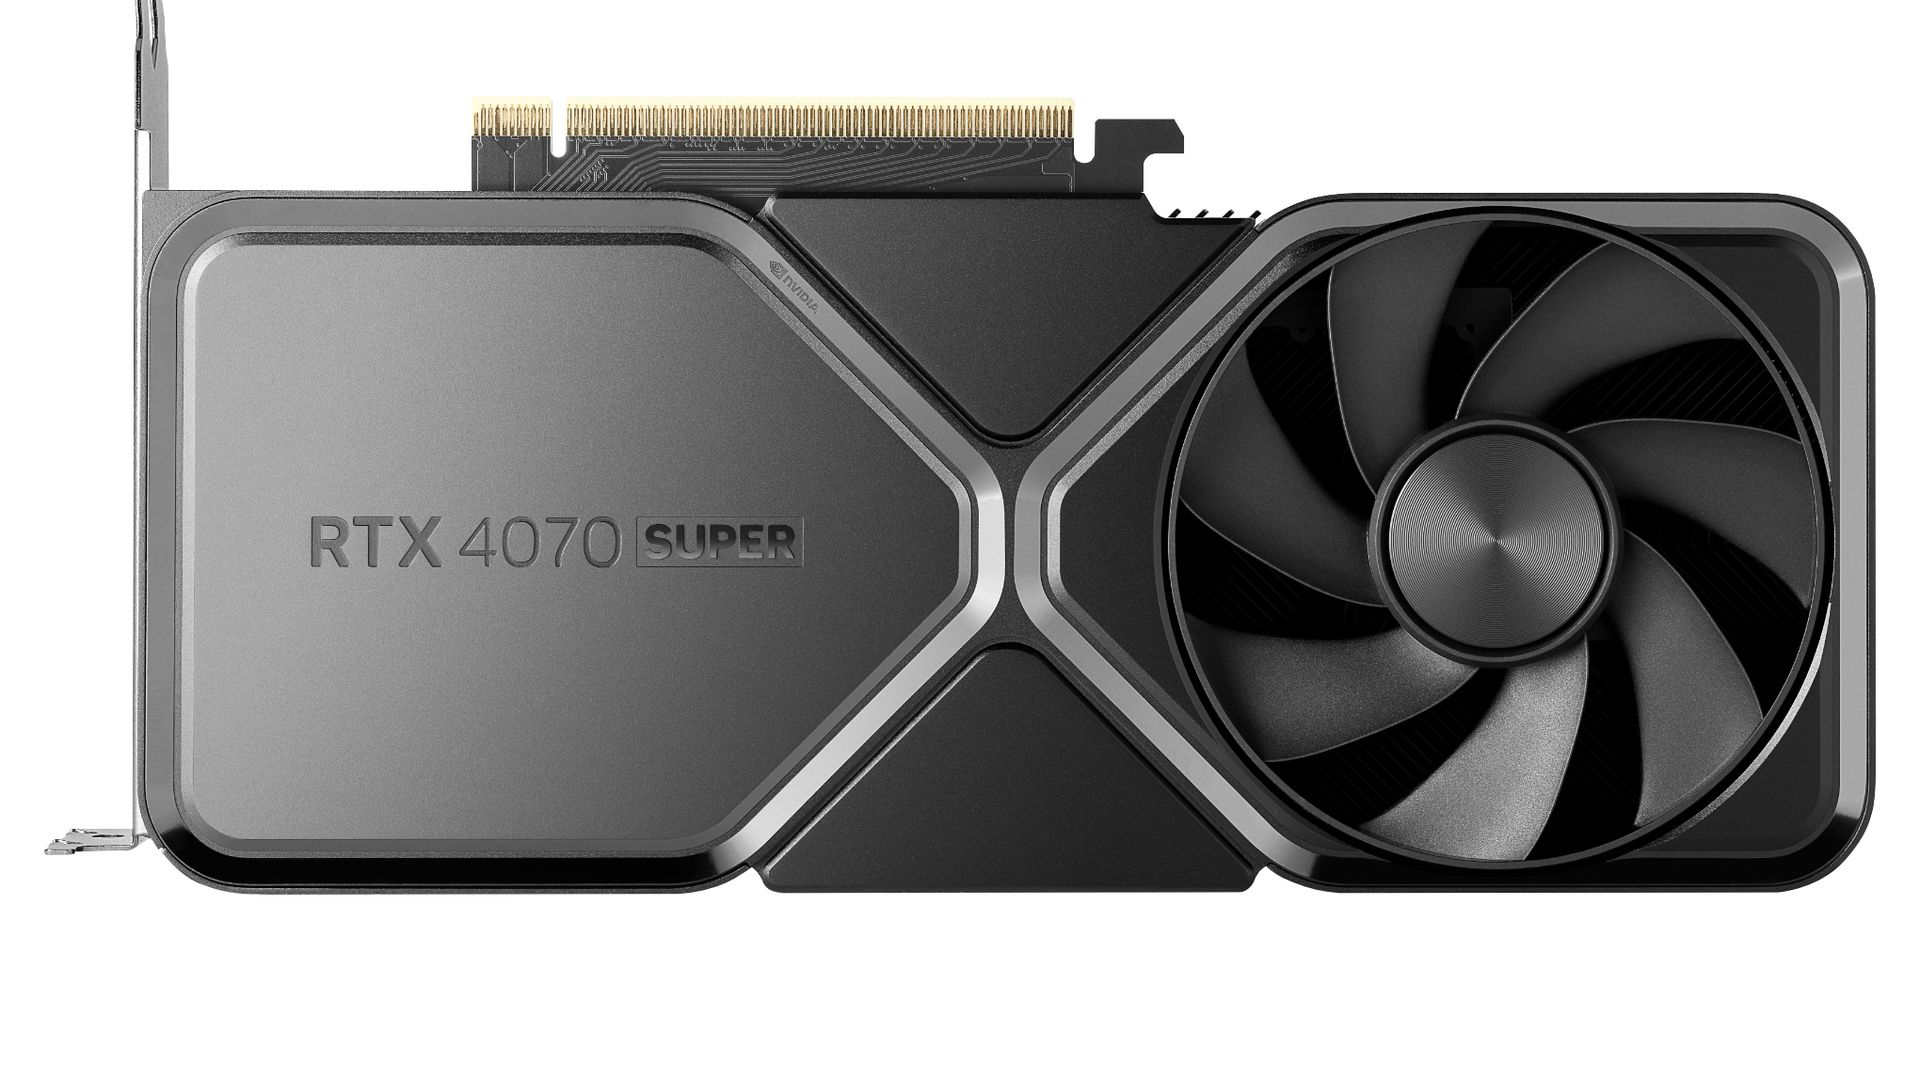 nvidia’s rtx 40 super gpus deliver more power without price hikes